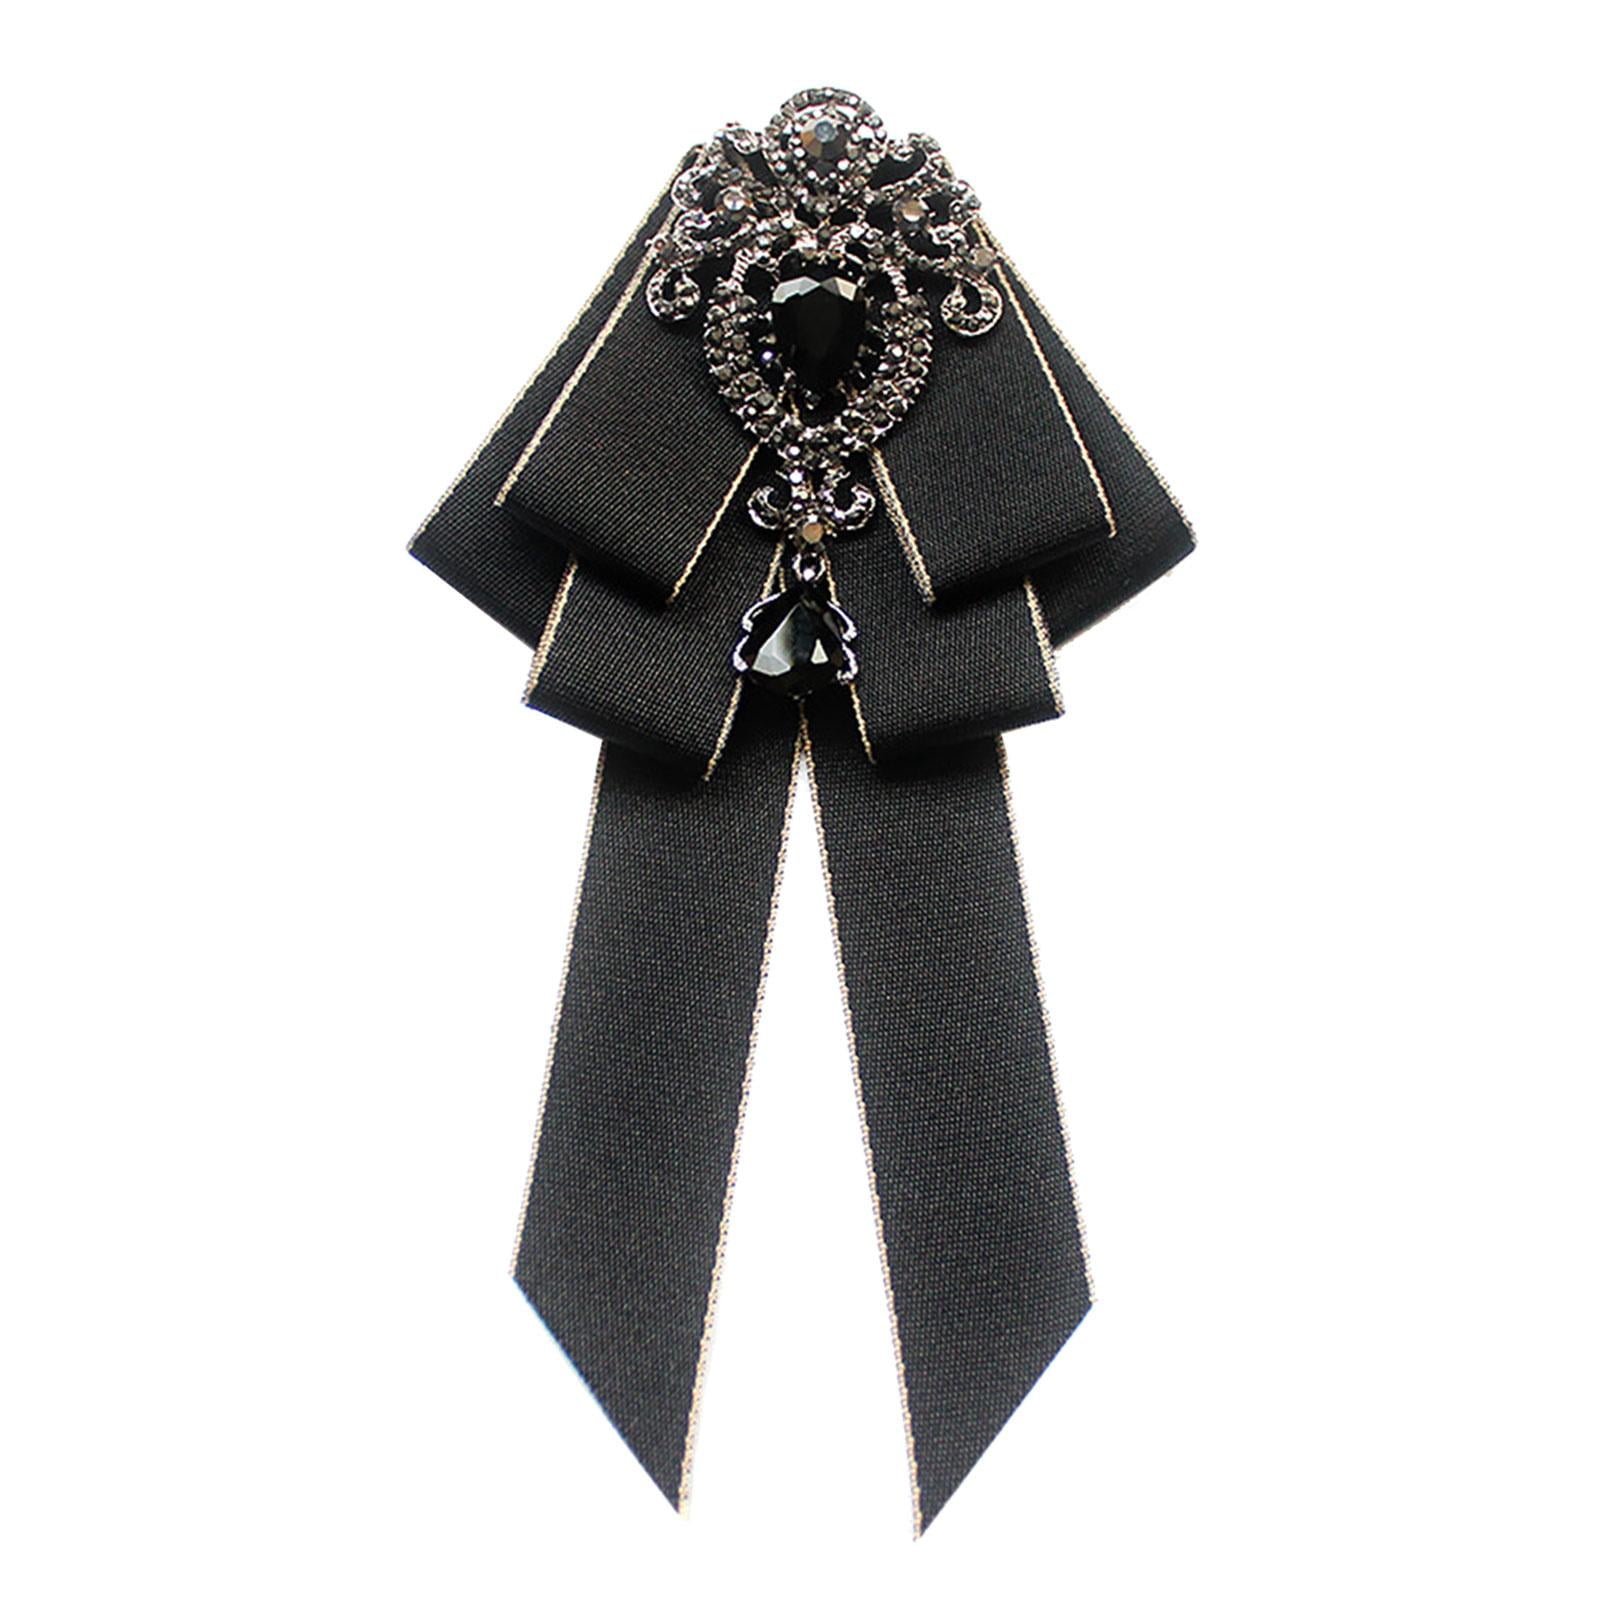  Black Color Rhinestone Bow Brooches for Women Large Bowknot  Brooch Pin Vintage Jewelry Winter Accessories: Clothing, Shoes & Jewelry